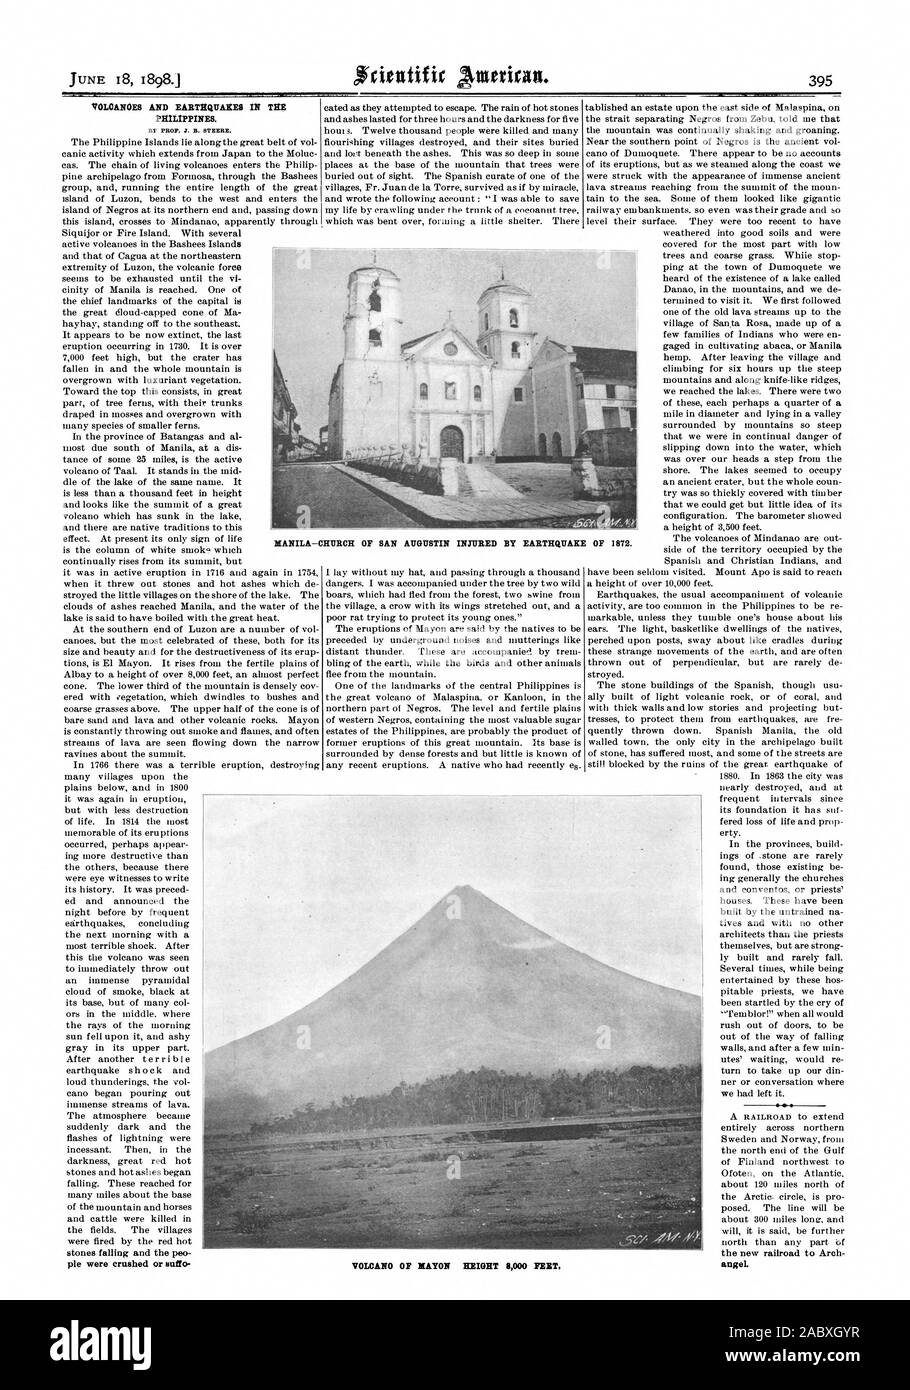 VOLCANOES AND EARTHQUAKES IN THE PHILIPPINES. BY PROP. J. B. STERRE. the new railroad to Arch angel. MANILA—CHURCH OF SAN AUGUSTIN INJURED BY EARTHQUAKE OF 1872. VOLCANO OF MAYON HEIGHT 8000 FEET., scientific american, 1898-06-18 Stock Photo